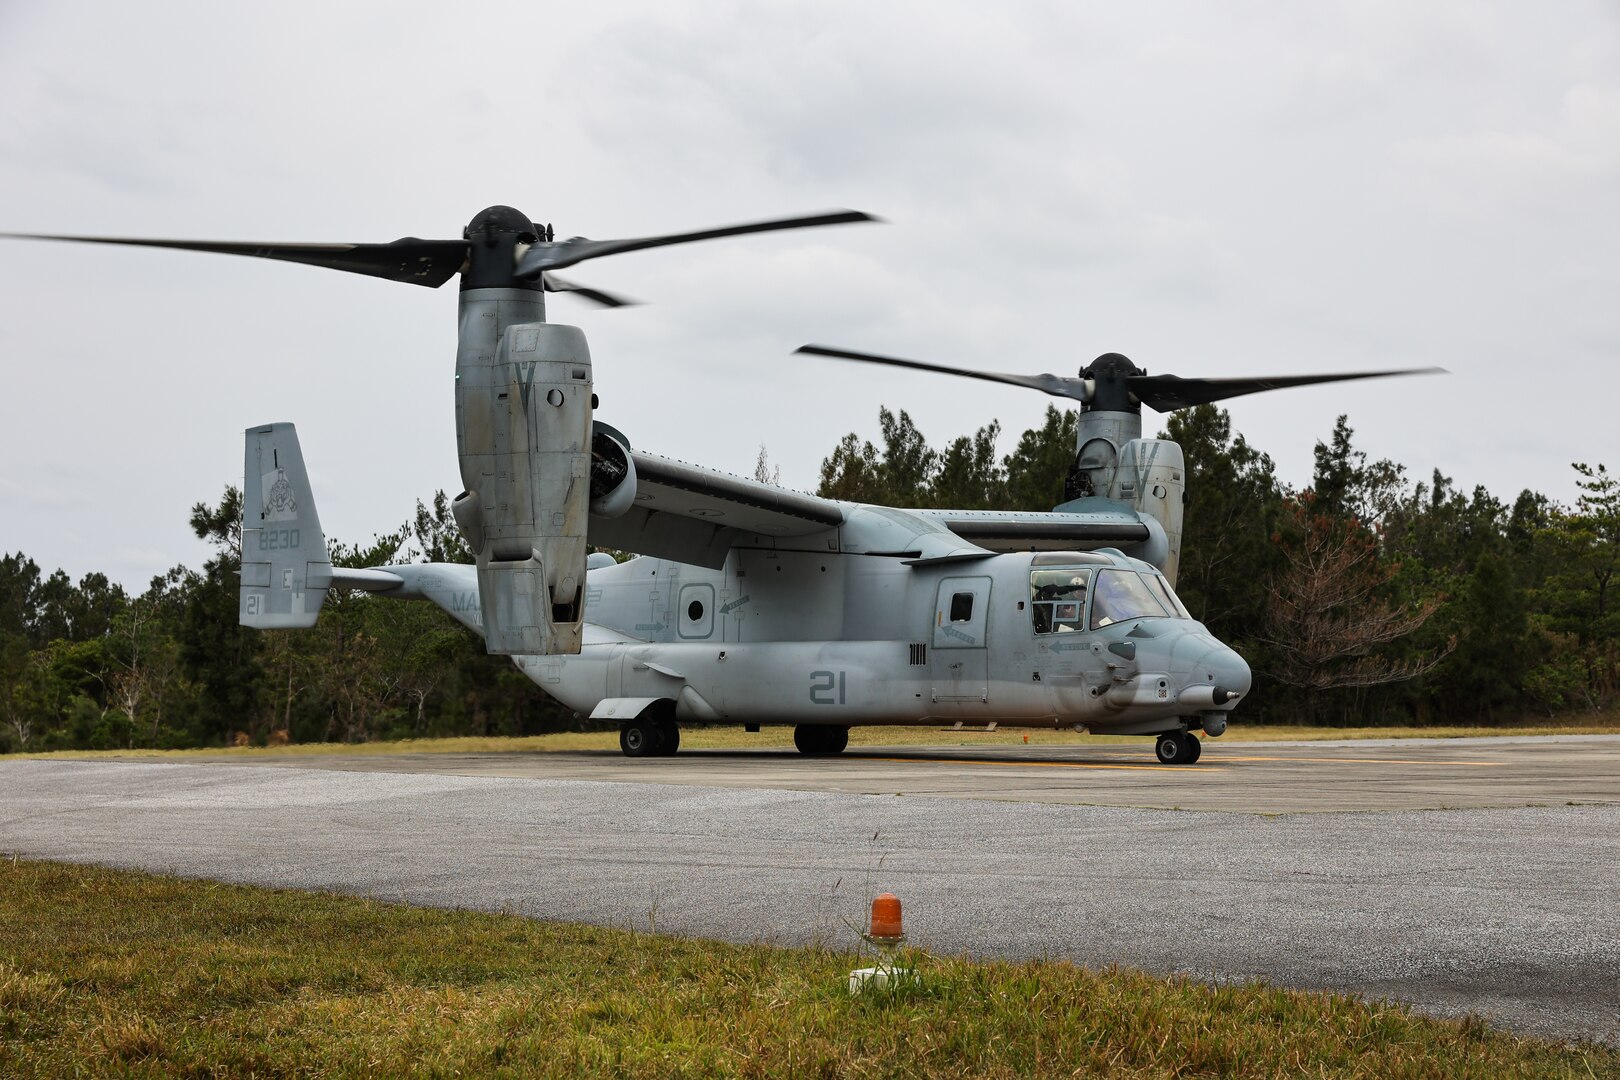 A U.S. Marine Corps MV-22B Osprey assigned to Marine Medium Tiltrotor Squadron 262 prepares for takeoff during Stand-in Force Exercise 24 at Camp Hansen, Okinawa, Japan, Dec. 1, 2023. SIFEX 24 is a division-level exercise involving all elements of the Marine Air-Ground Task Force focused on strengthening multi-domain awareness, maneuver, and fires across a distributed airtime environment.